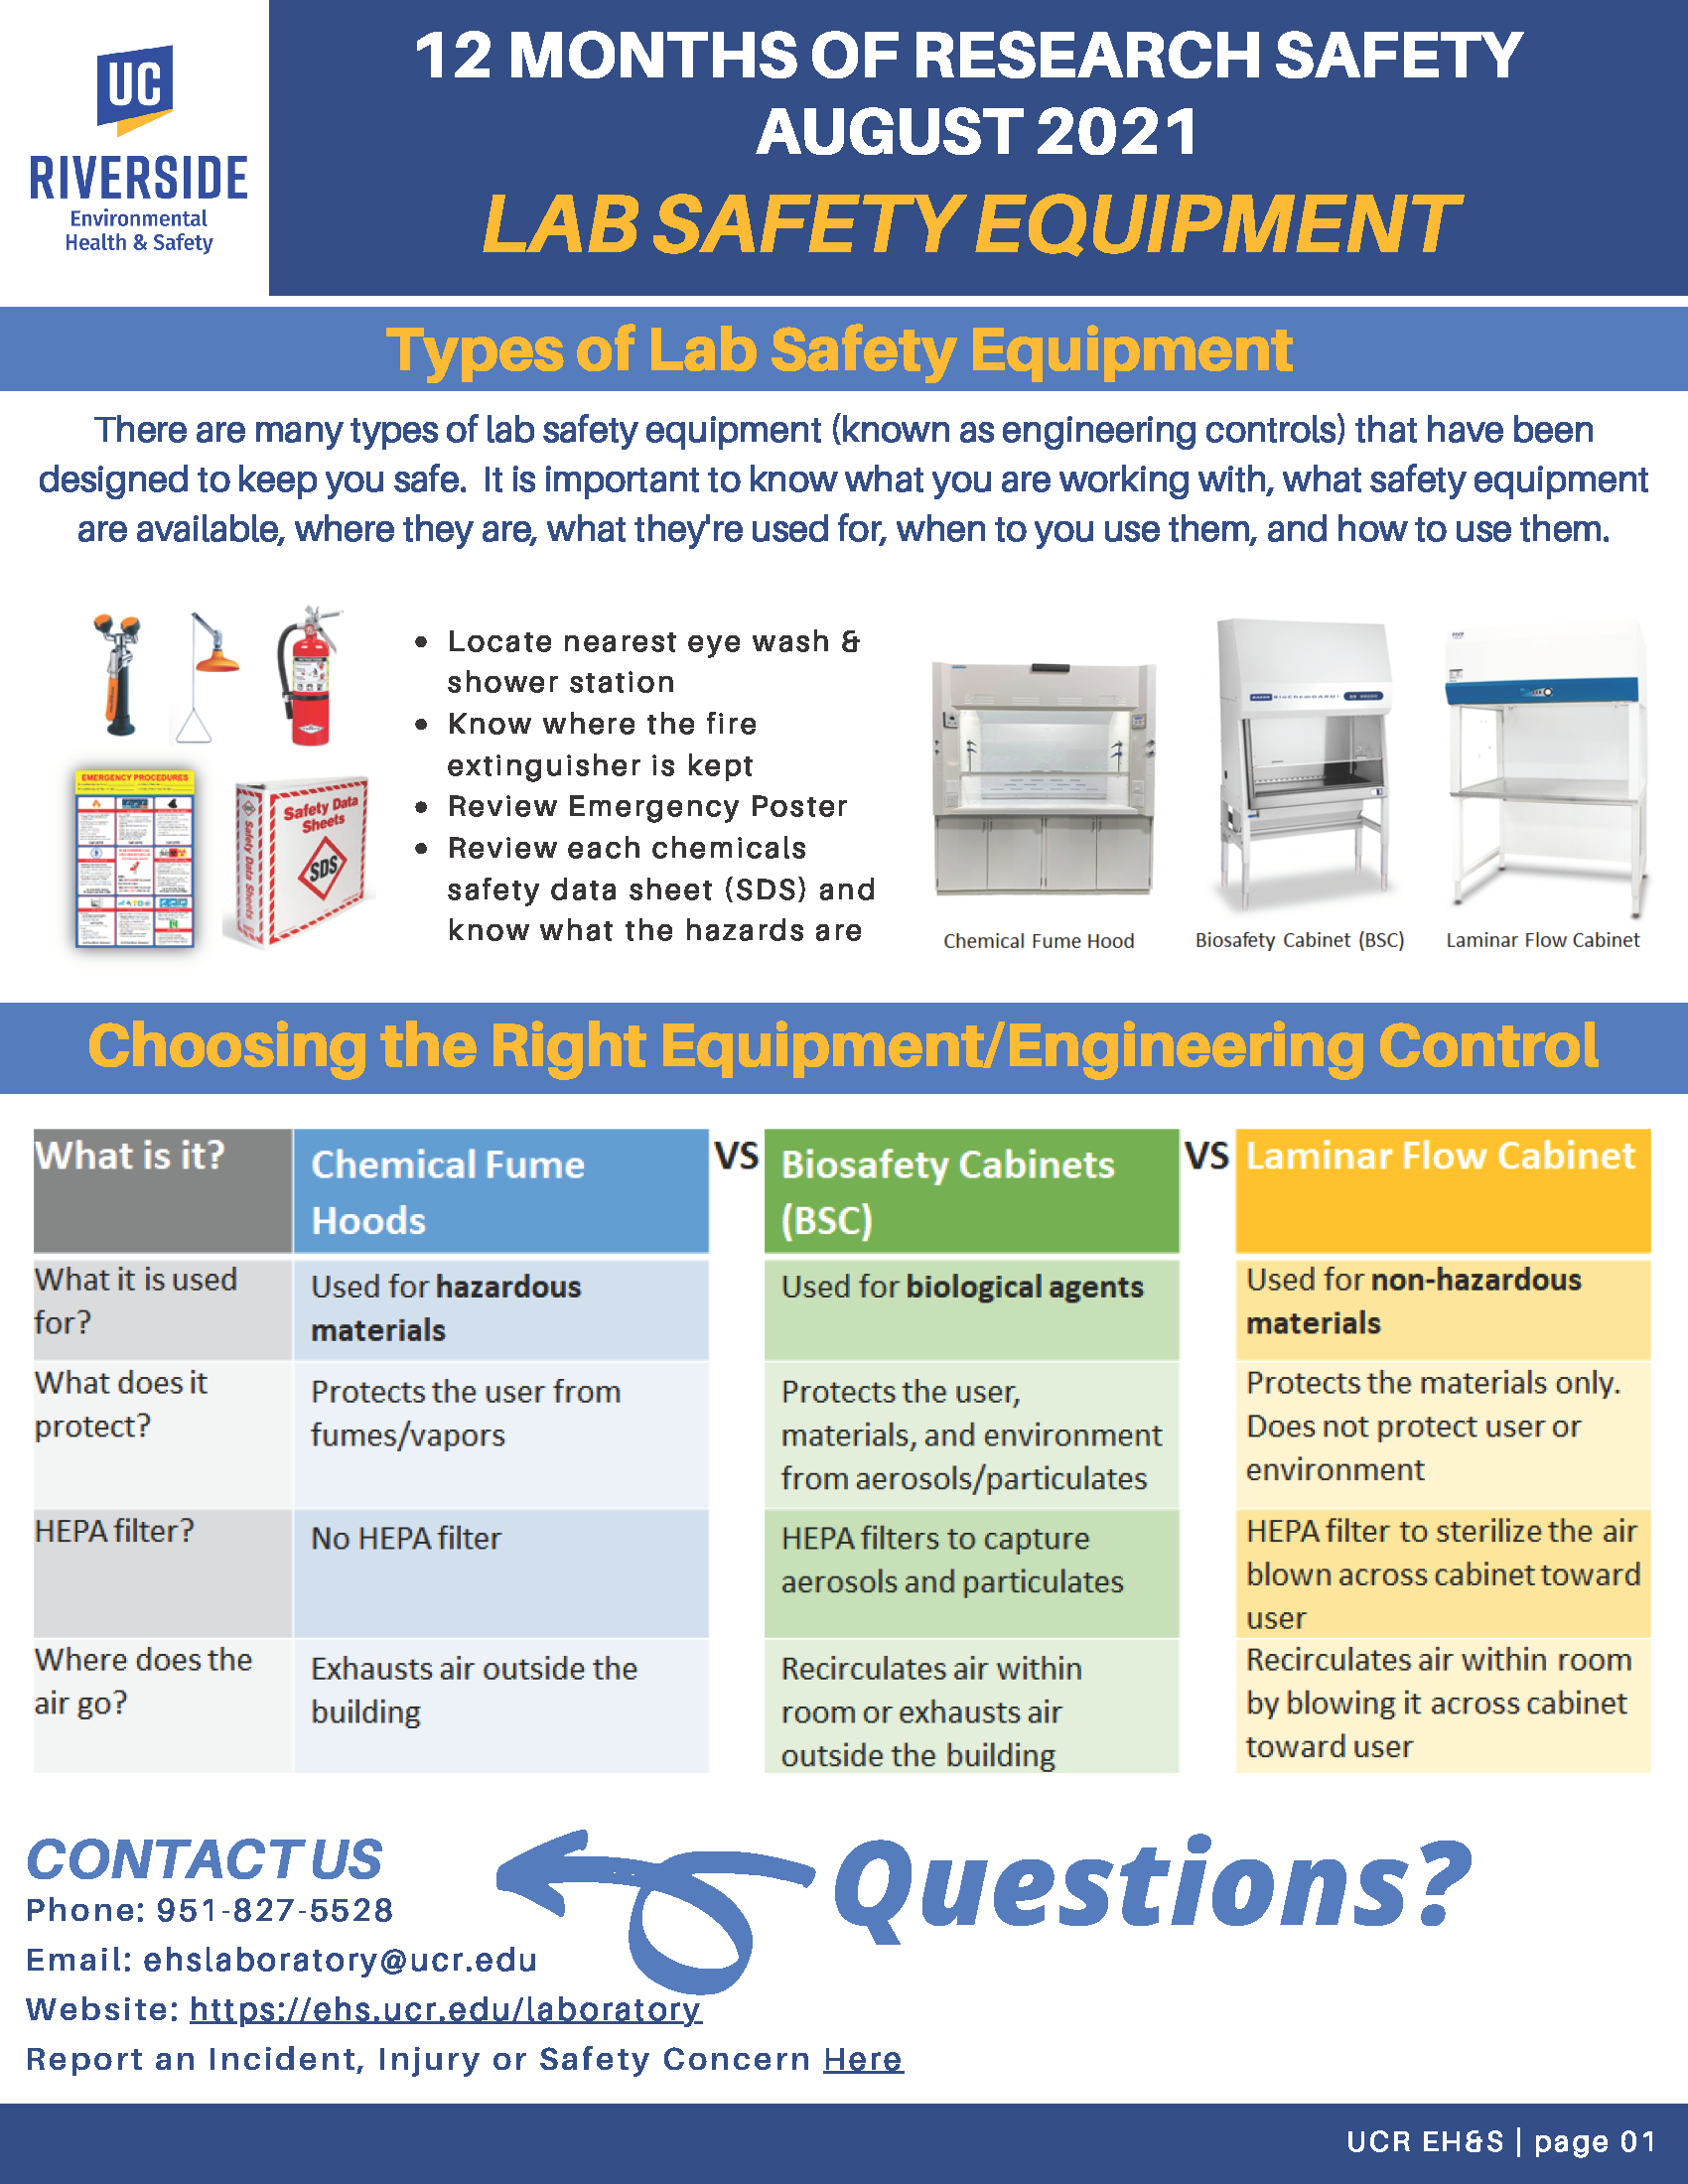 ResearchSafety_August2021_LabSafetyEquipment_page1